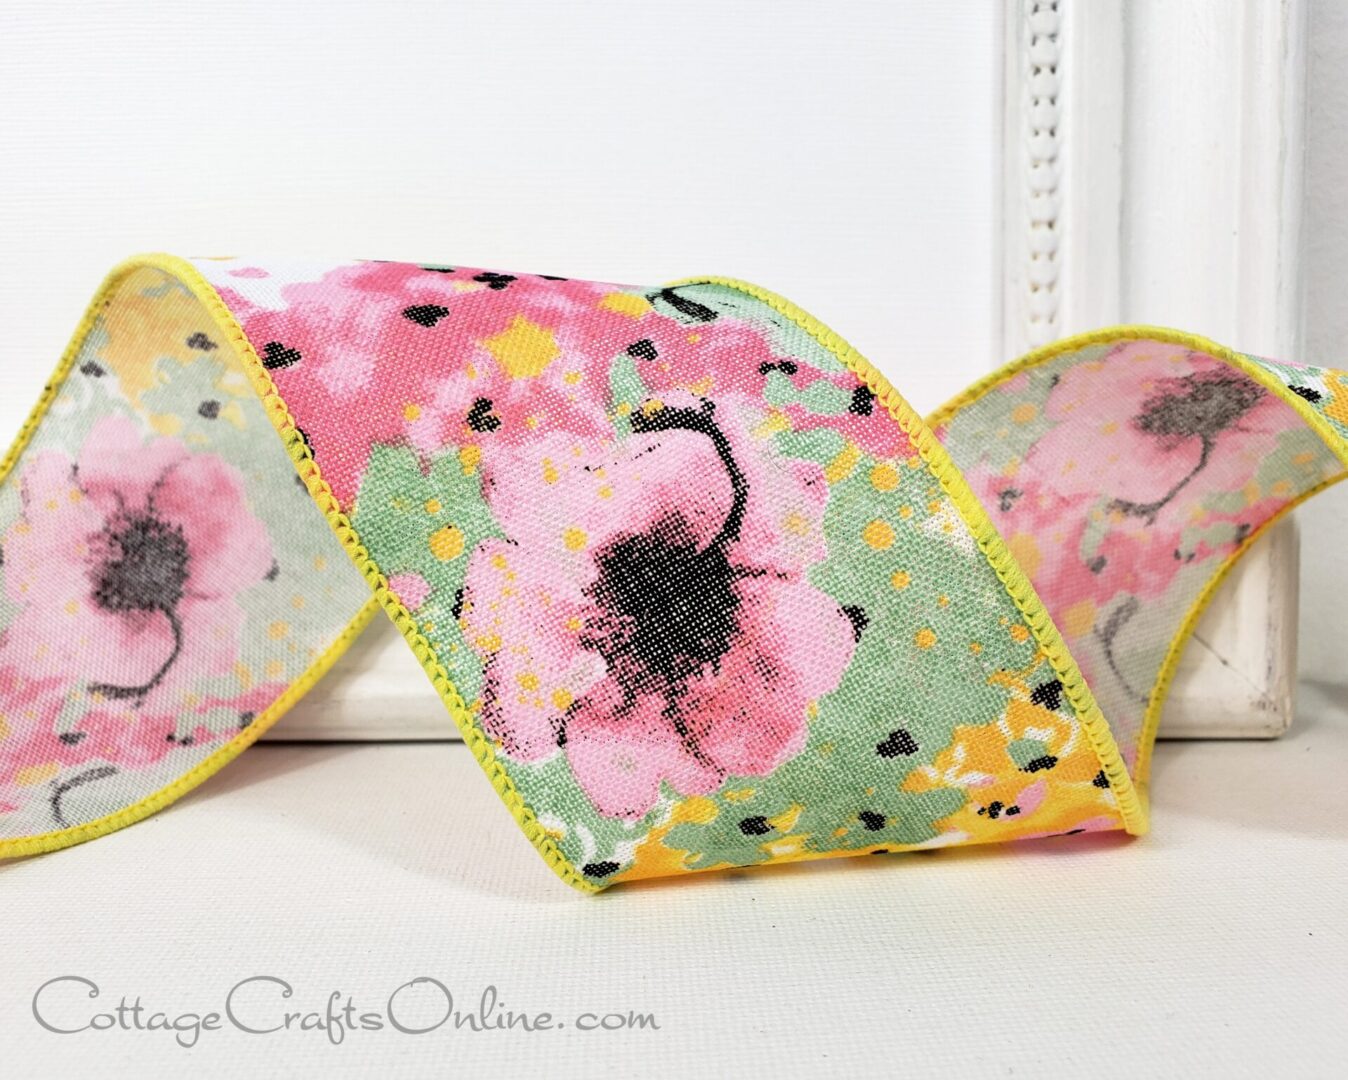 A pink ribbon with flowers available at Cottage Crafts online.